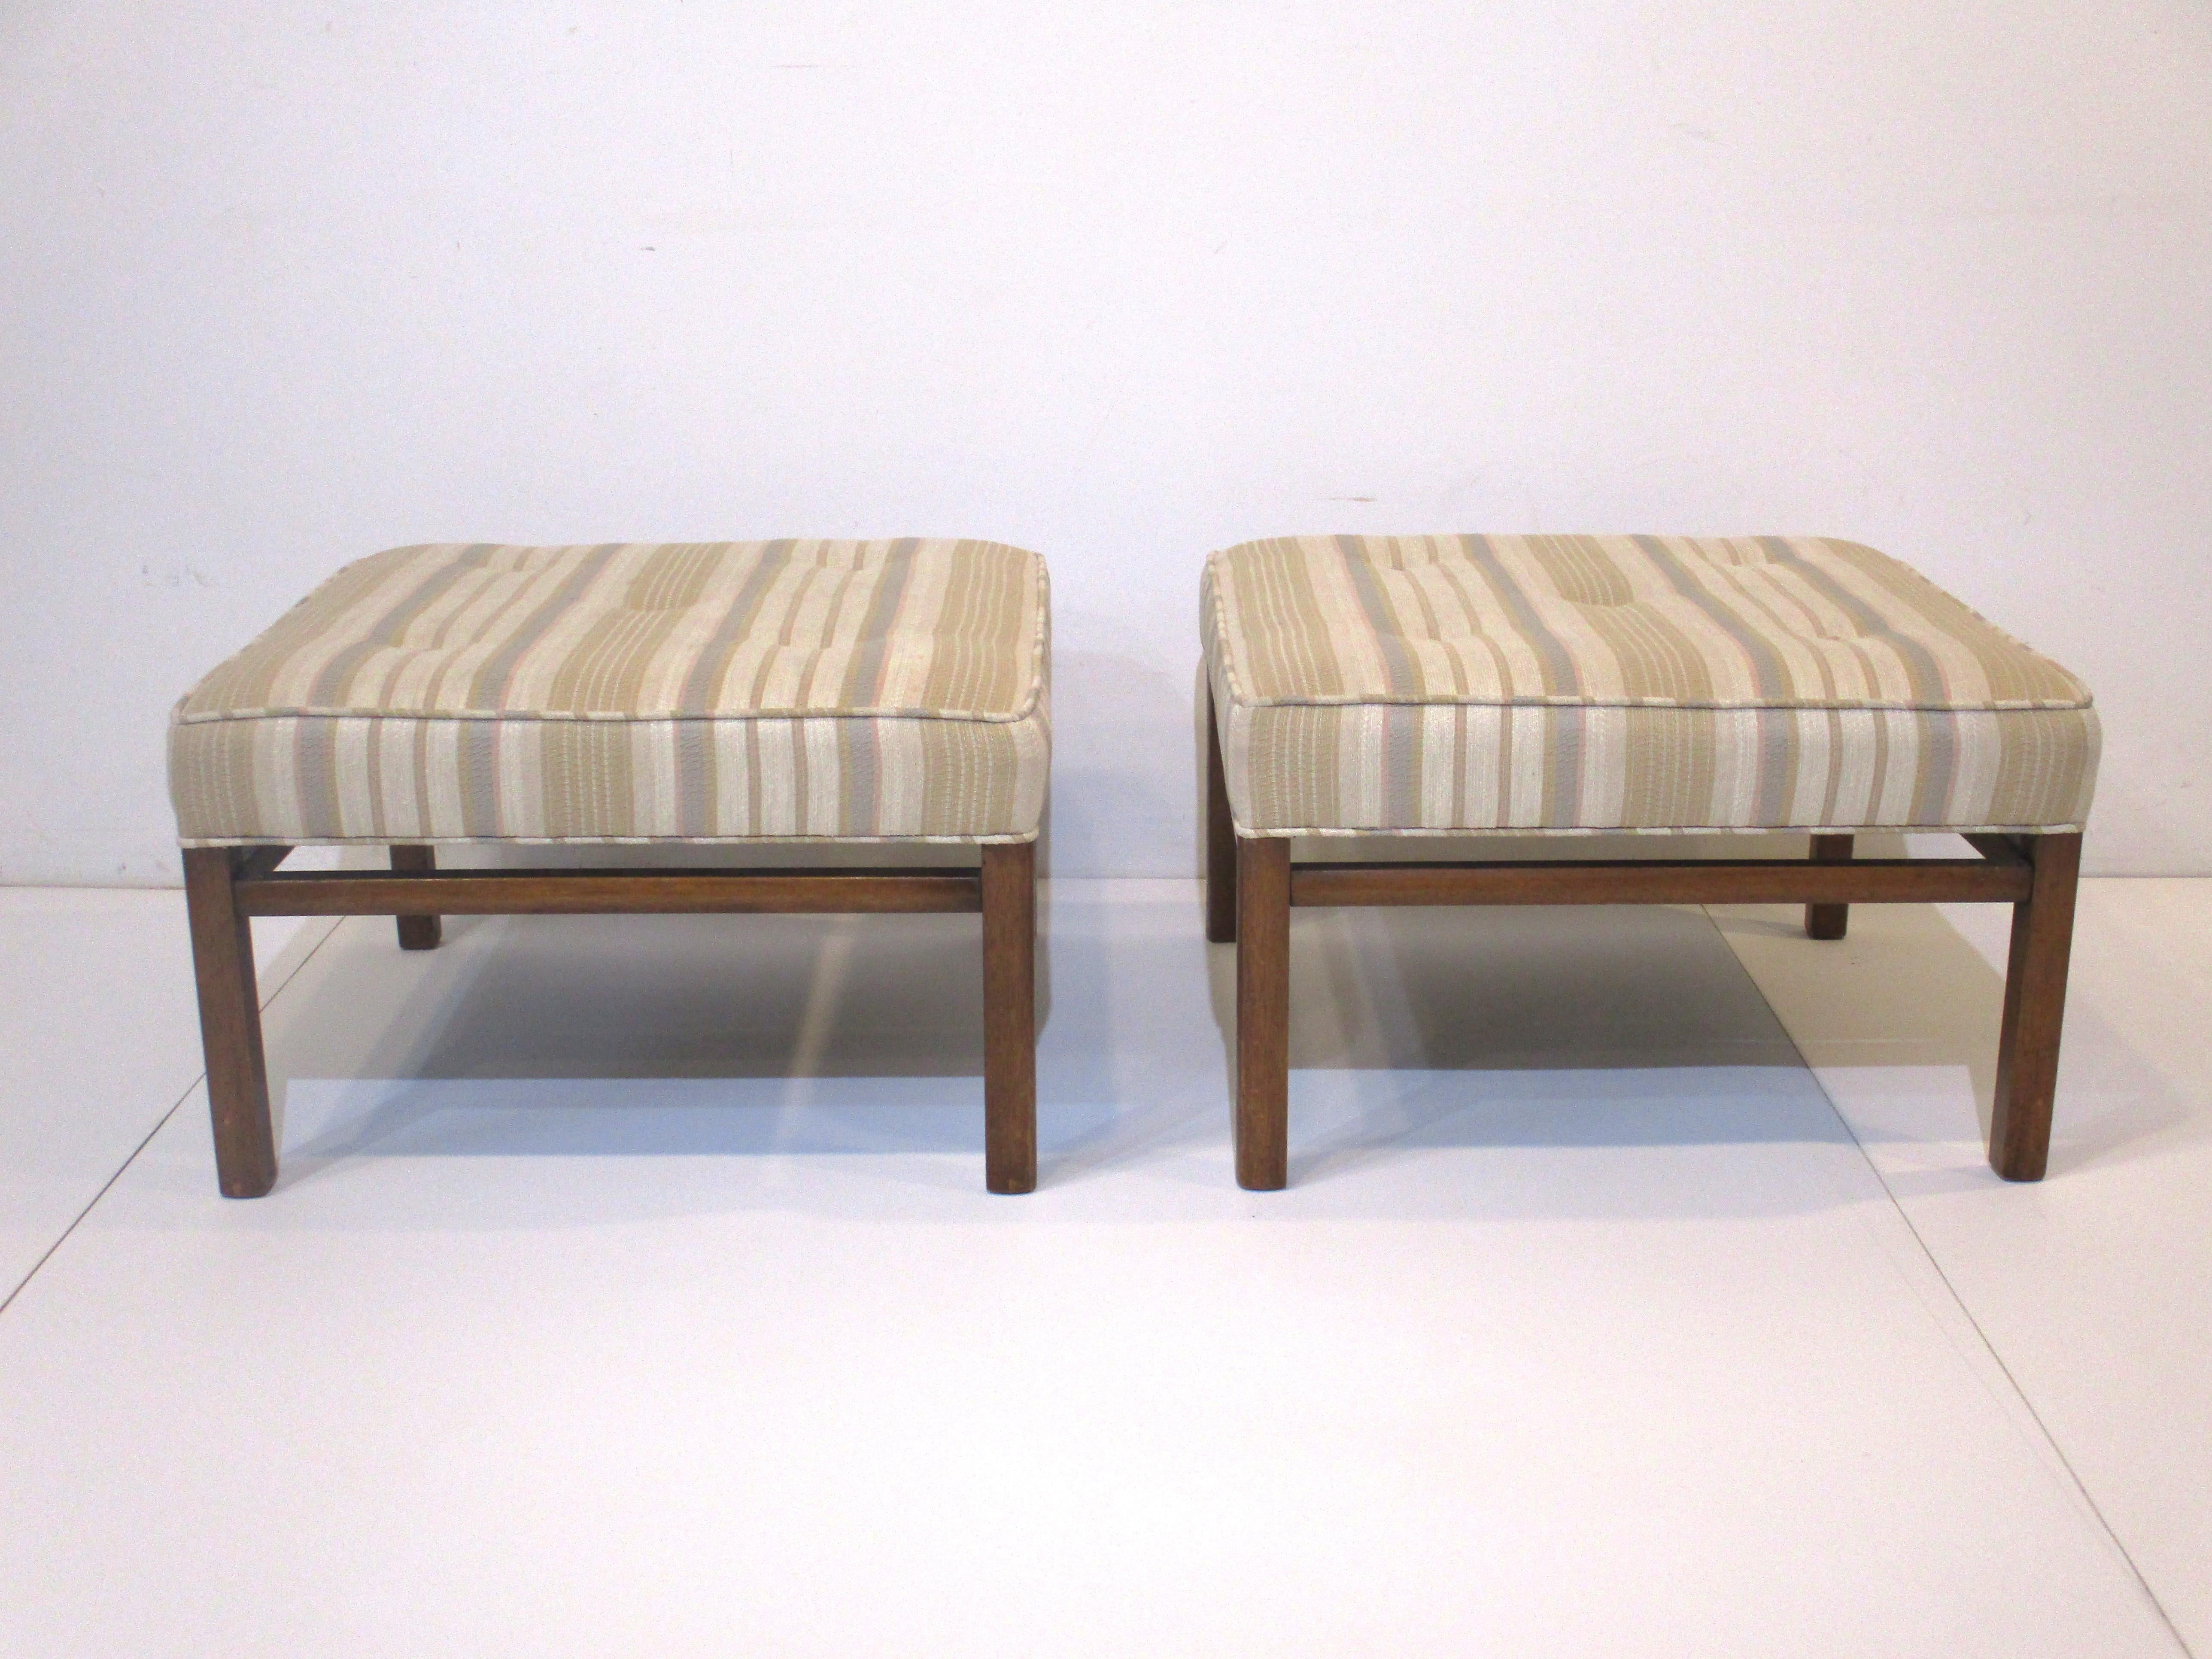 A pair of upholstered ottomans or stools with dark toned mahogany frames and legs . The top stripes in the fabric are creams, taupes , gray and tans with buttons giving them a tight look and feel in the manner of Harvey Probber.